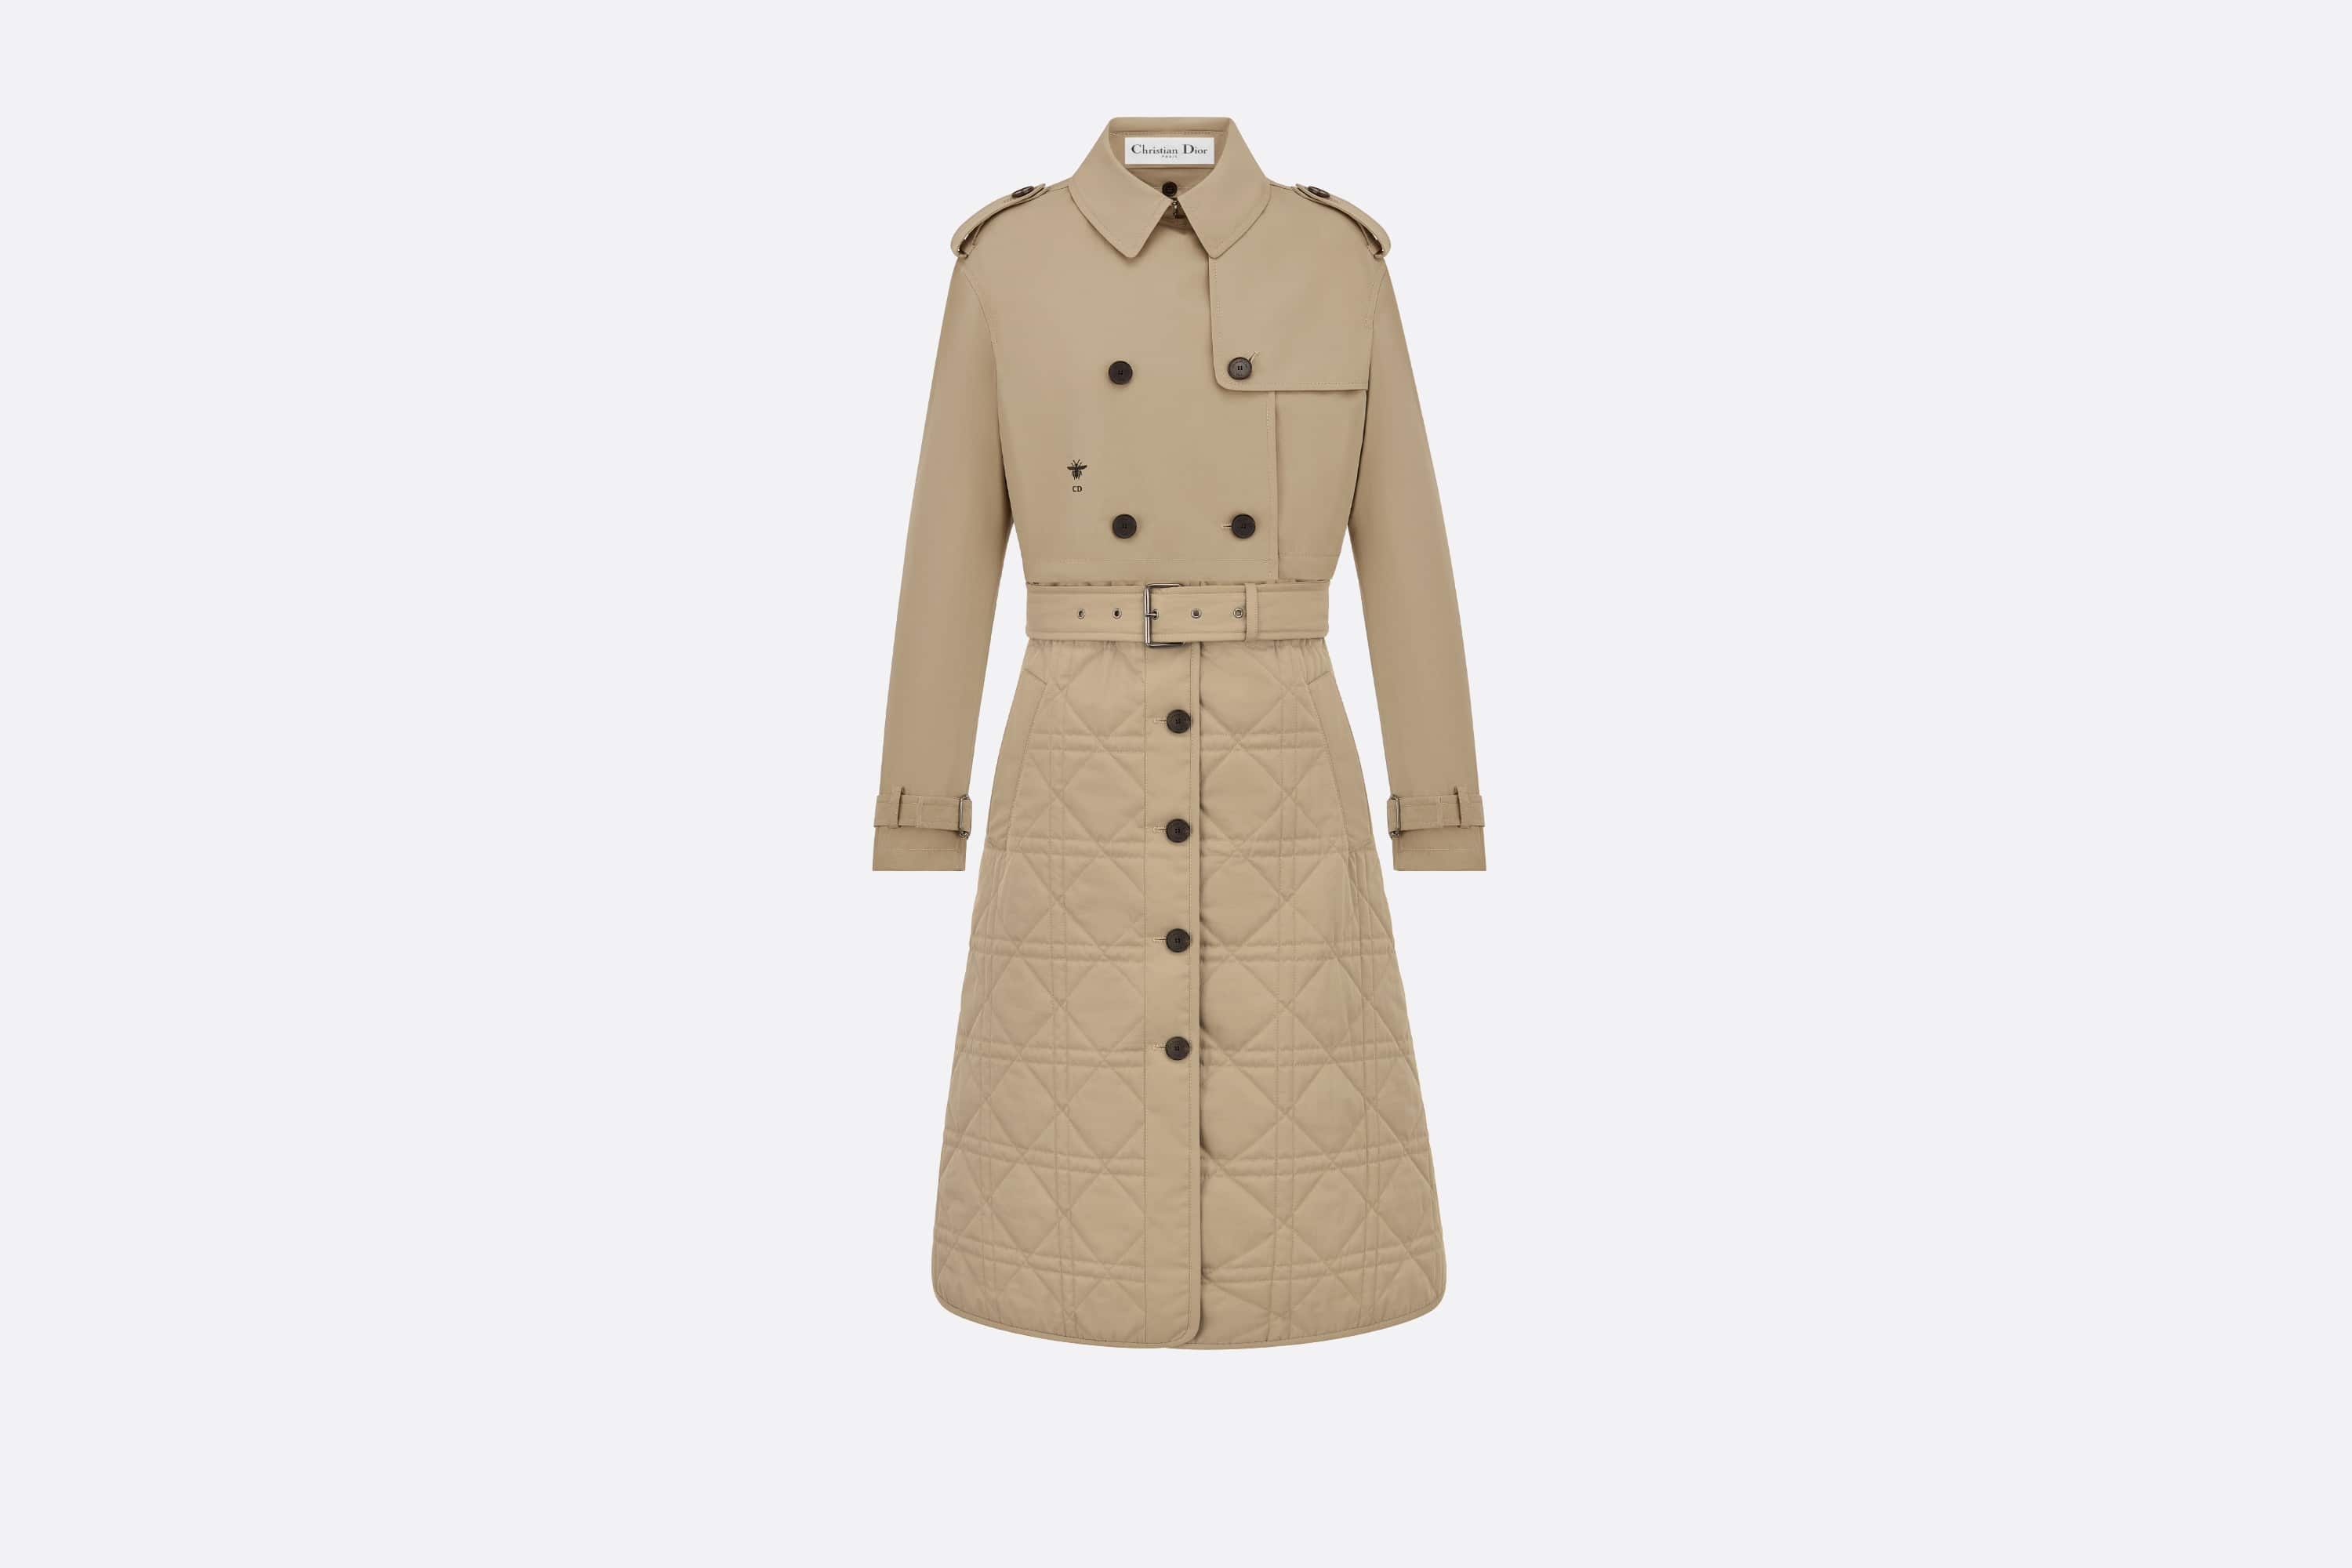 Christian Dior 3-in-1 Macrocannage Trench Coat